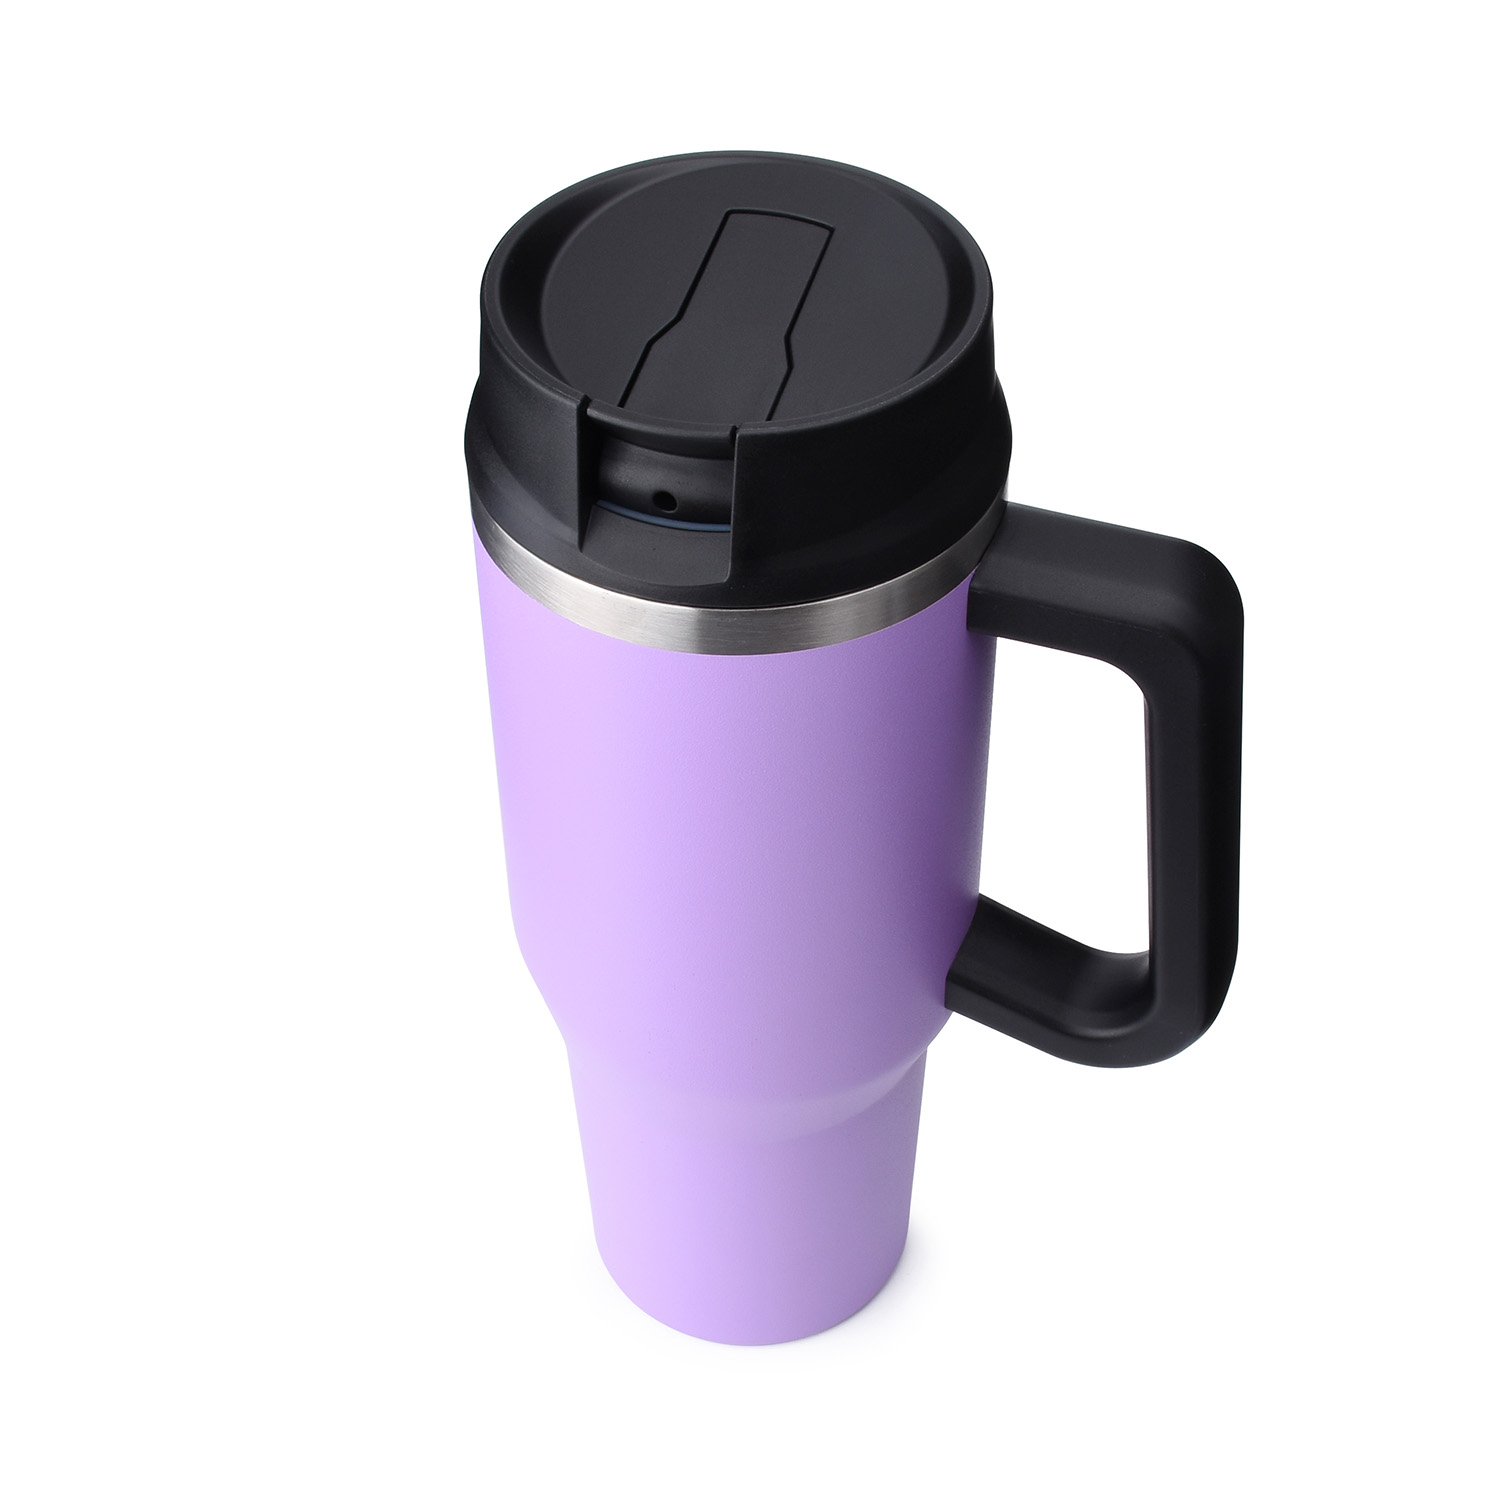 https://www.waterbottle.tech/wp-content/uploads/2021/09/insulated-travel-tumbler-with-handle-32-oz-straw-lid-s213200-4.jpg